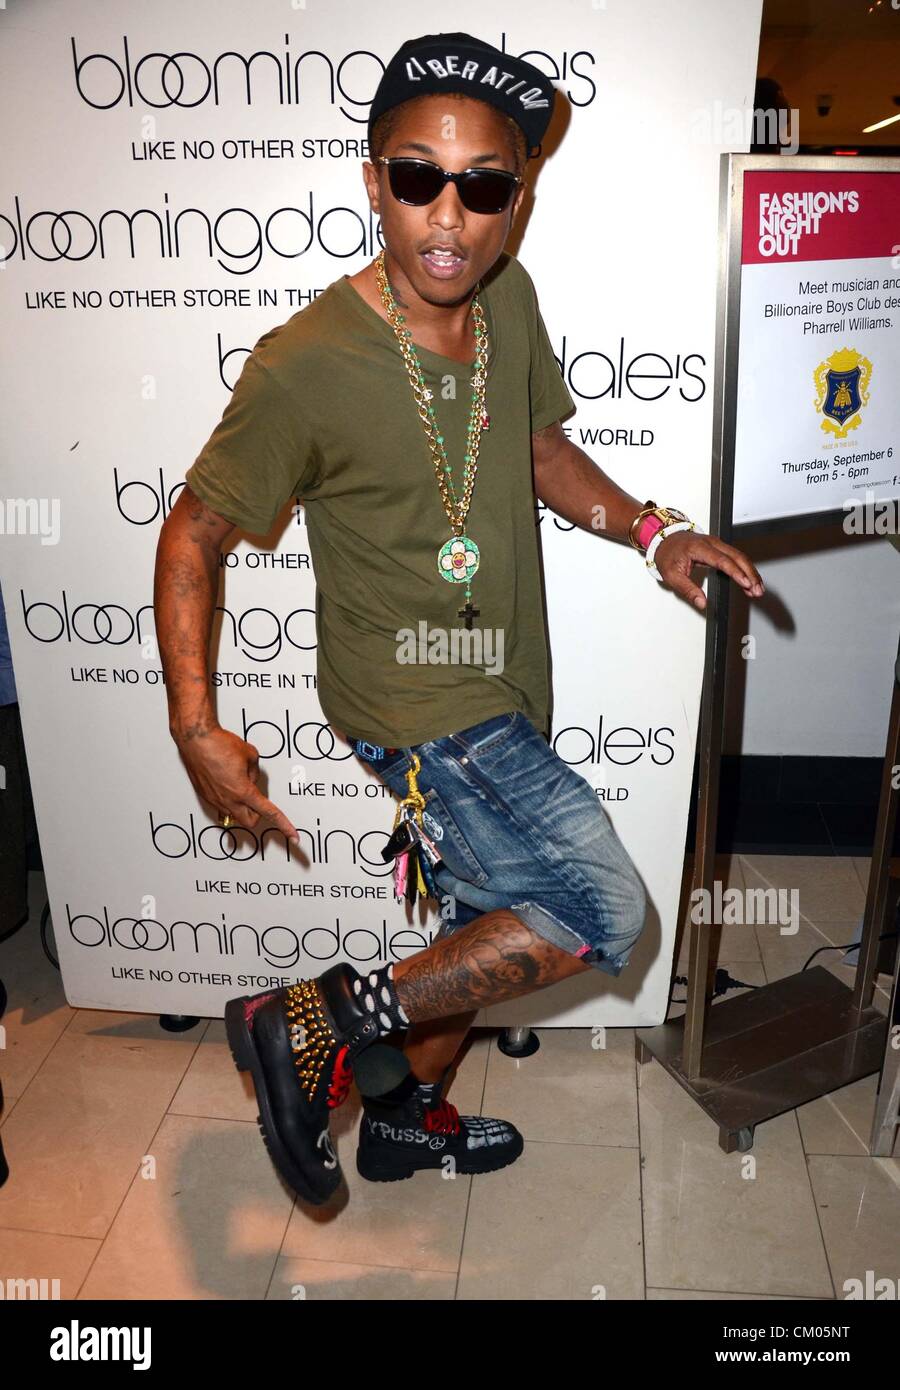 Pharrell Williams in attendance for Bloomingdale's Fashion's Night Out (FNO) Celebration, Bloomingdale's Flagship Store, New York, NY September 6, 2012. Photo By: Derek Storm/Everett Collection Stock Photo